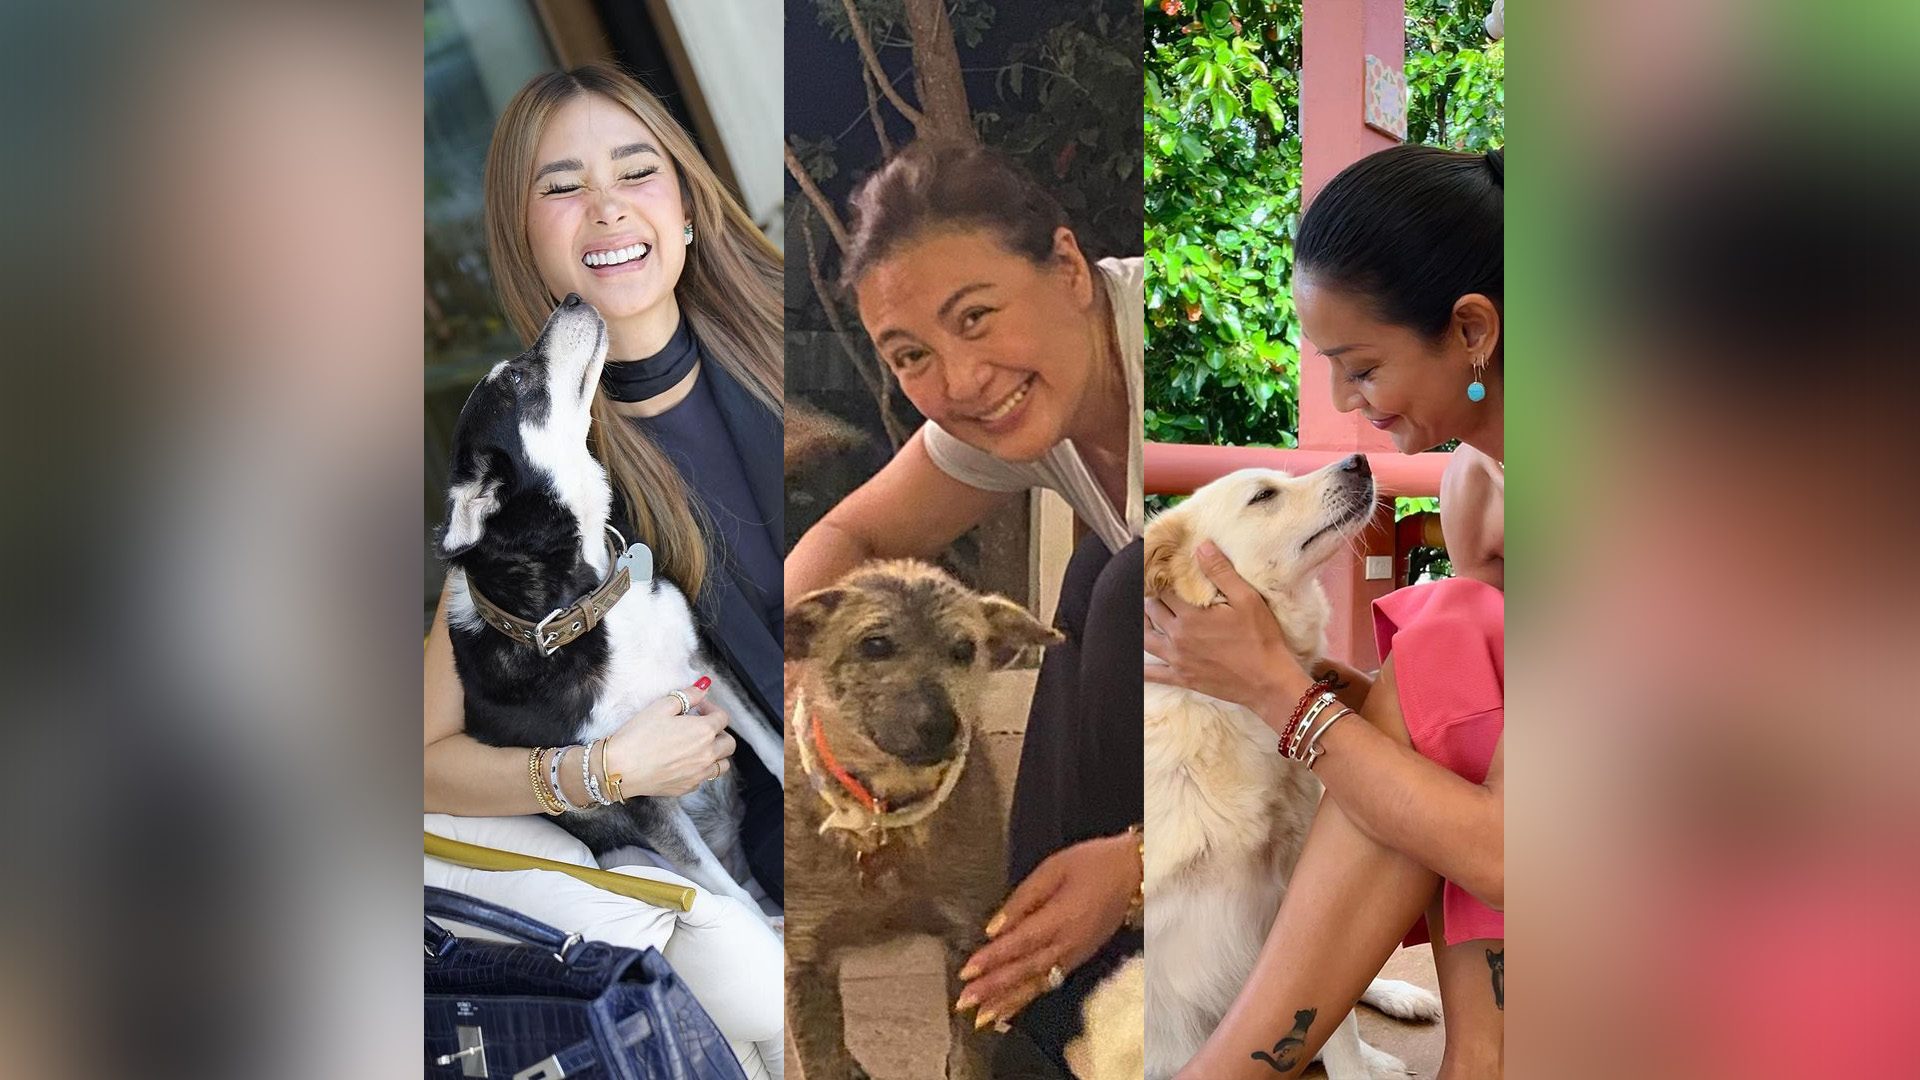 Adopt don’t shop: Filipino celebrities with rescue dogs